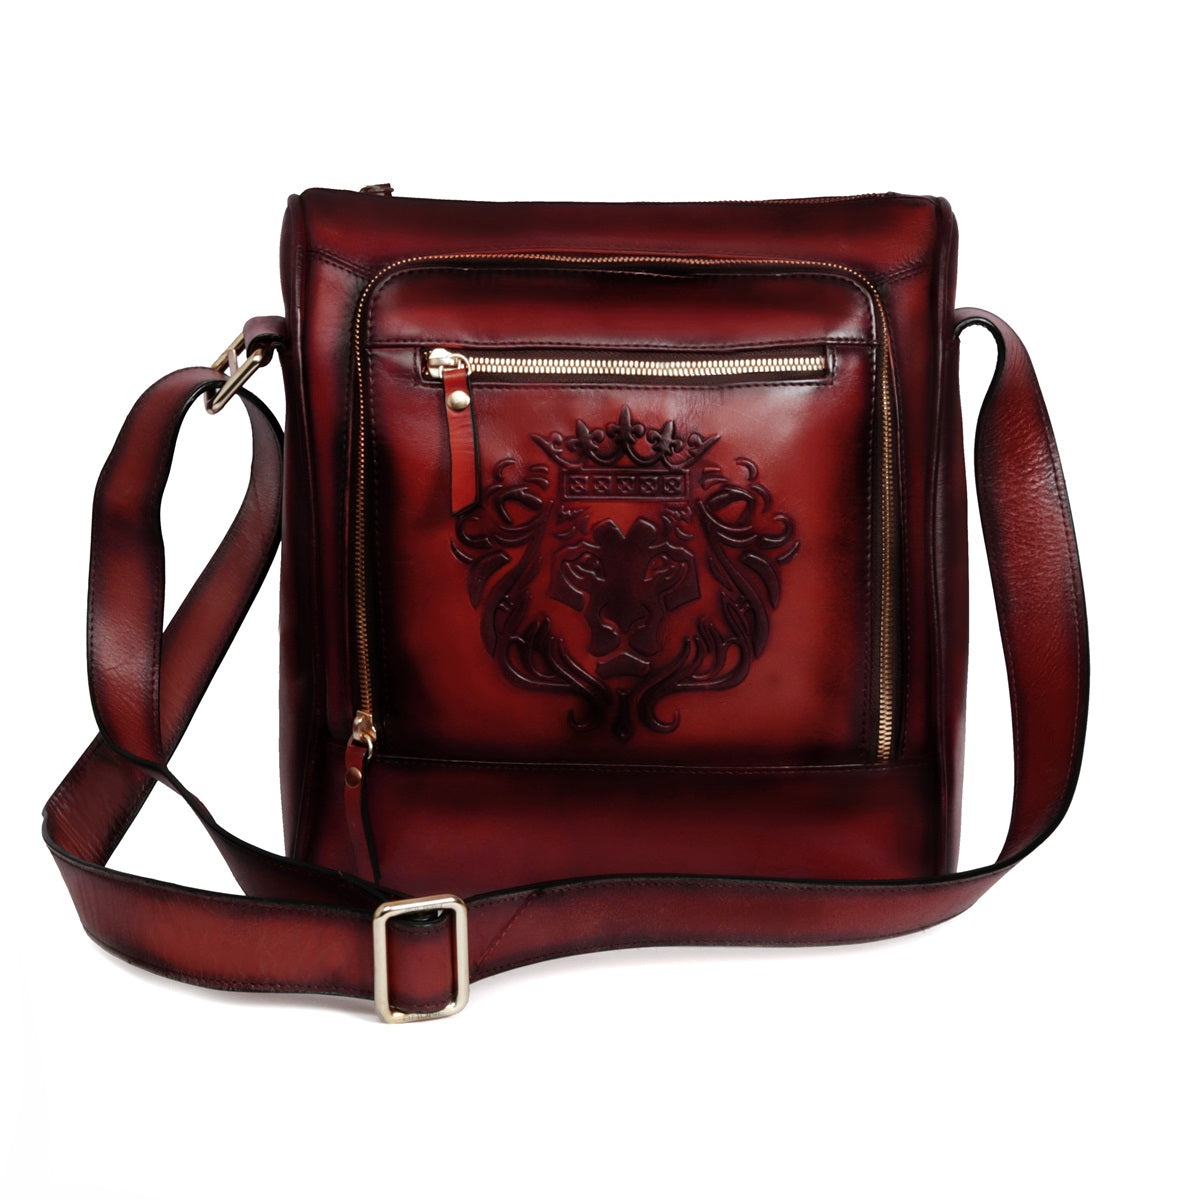 Cross Body Bag In Wine Leather with Embossed Lion